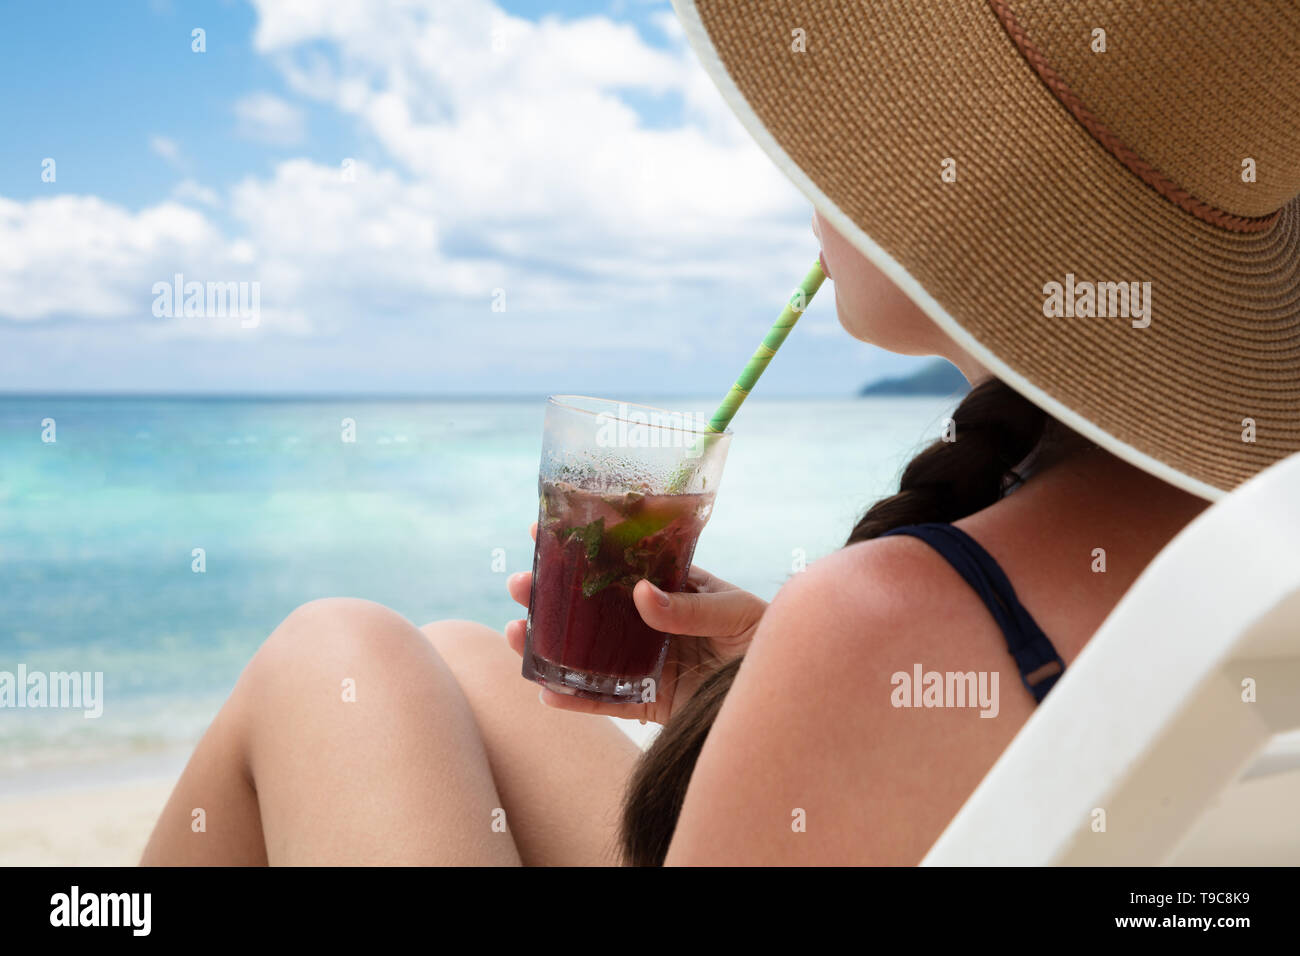 Woman Sitting On Deck Chair Wearing Hat Drinking The Juice With Straw At The Beach Stock Photo